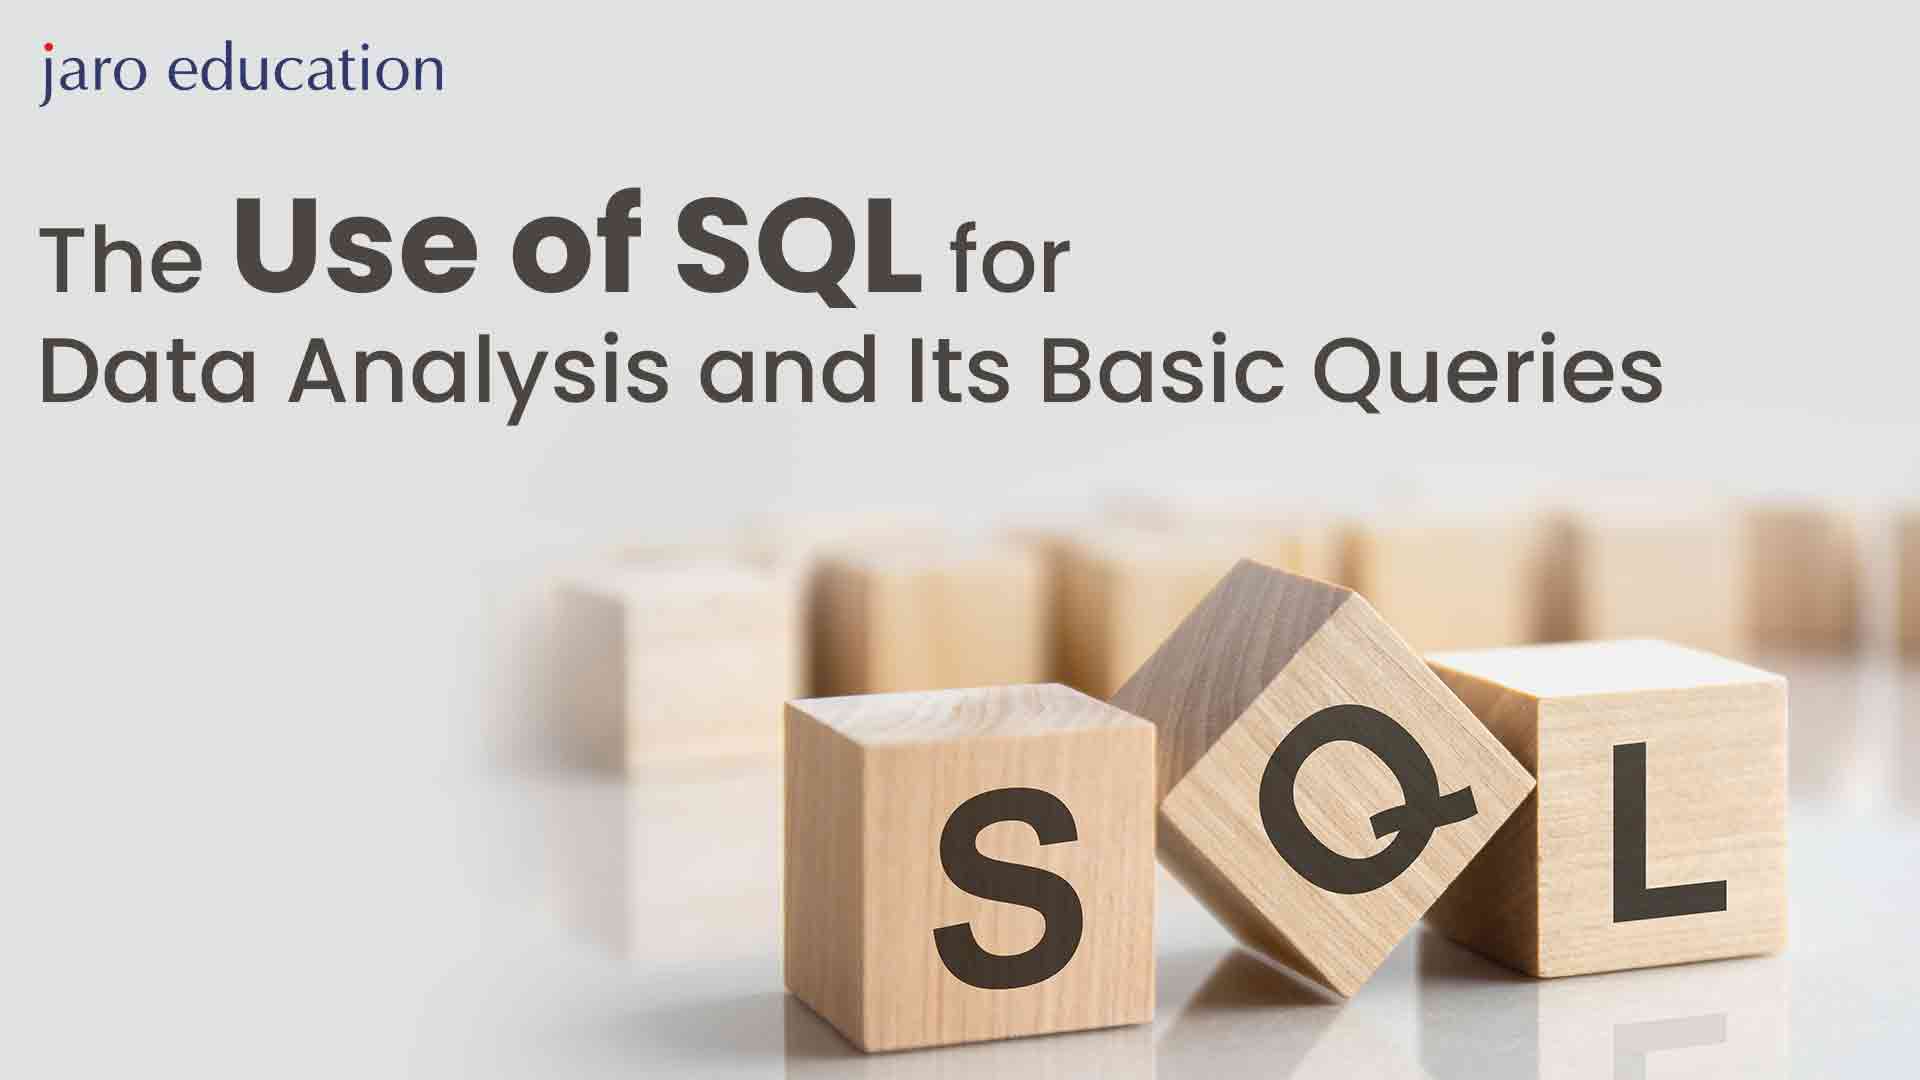 The Use of SQL for Data Analysis and Its Basic Queries